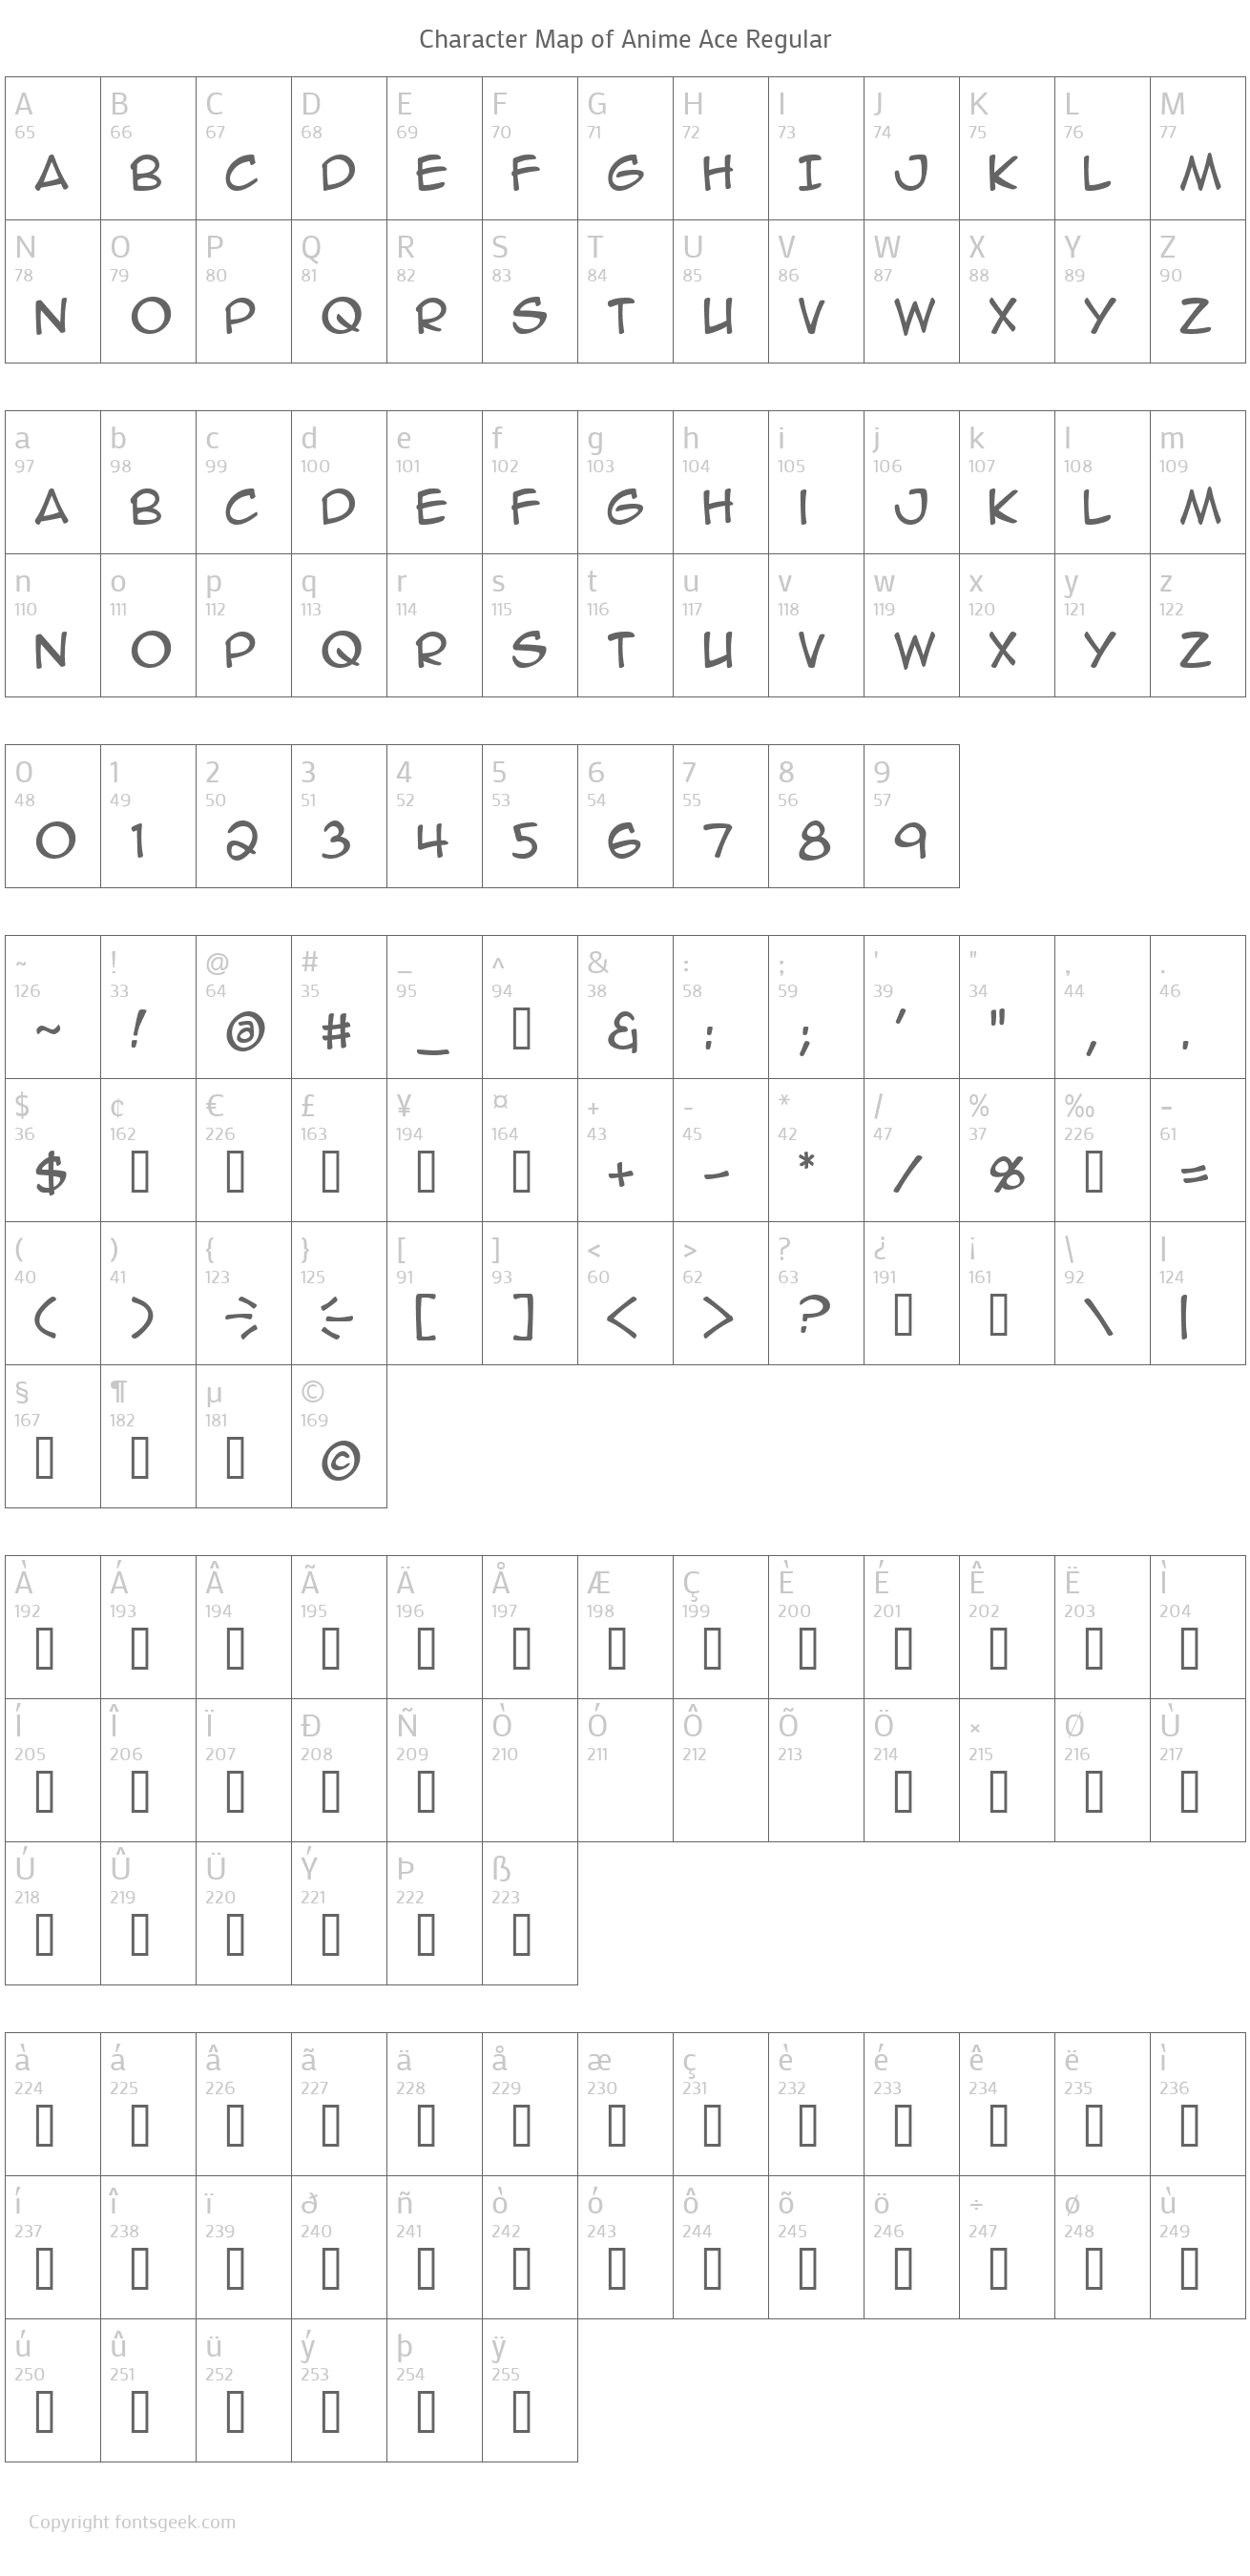 Anime Ace Font License